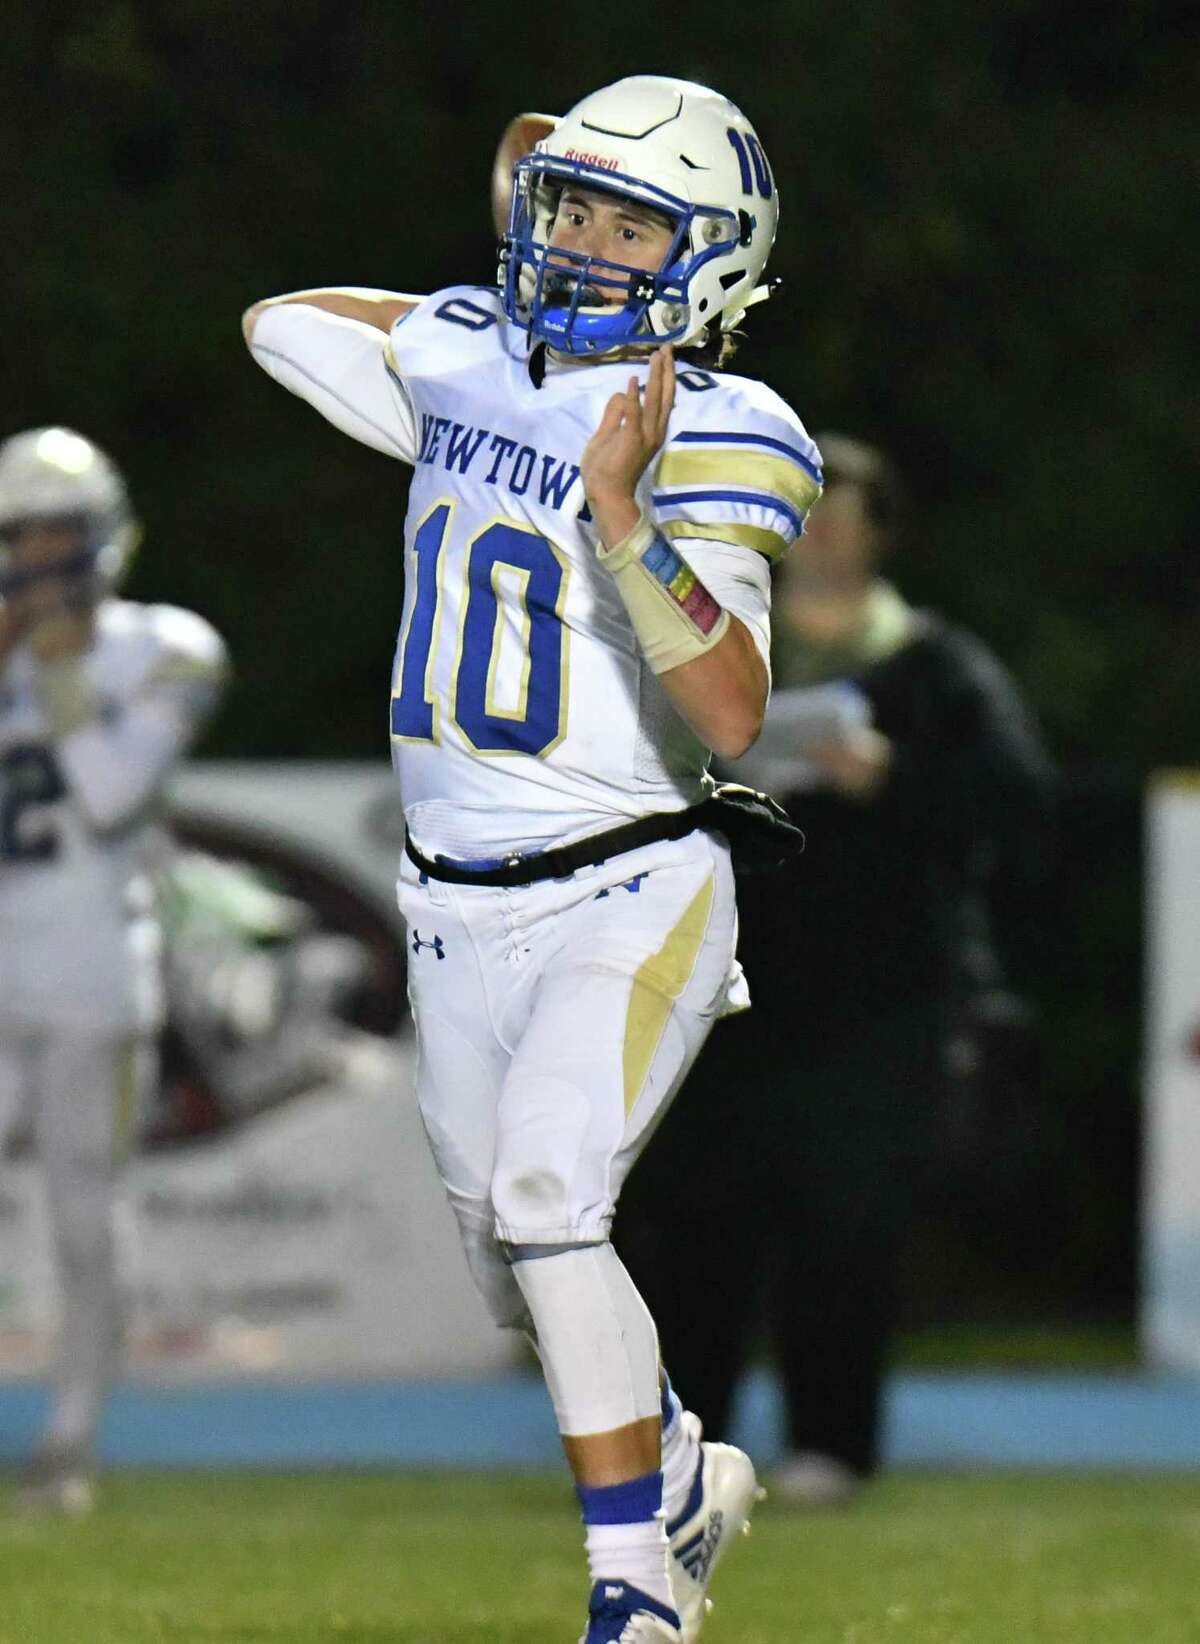 Luke Melillo (7) of the Newtown Nighthawks passes during a game against the Bunnell Bulldogs on Friday October 26, 2018, at Bunnell High School in Stratford, Connecticut.